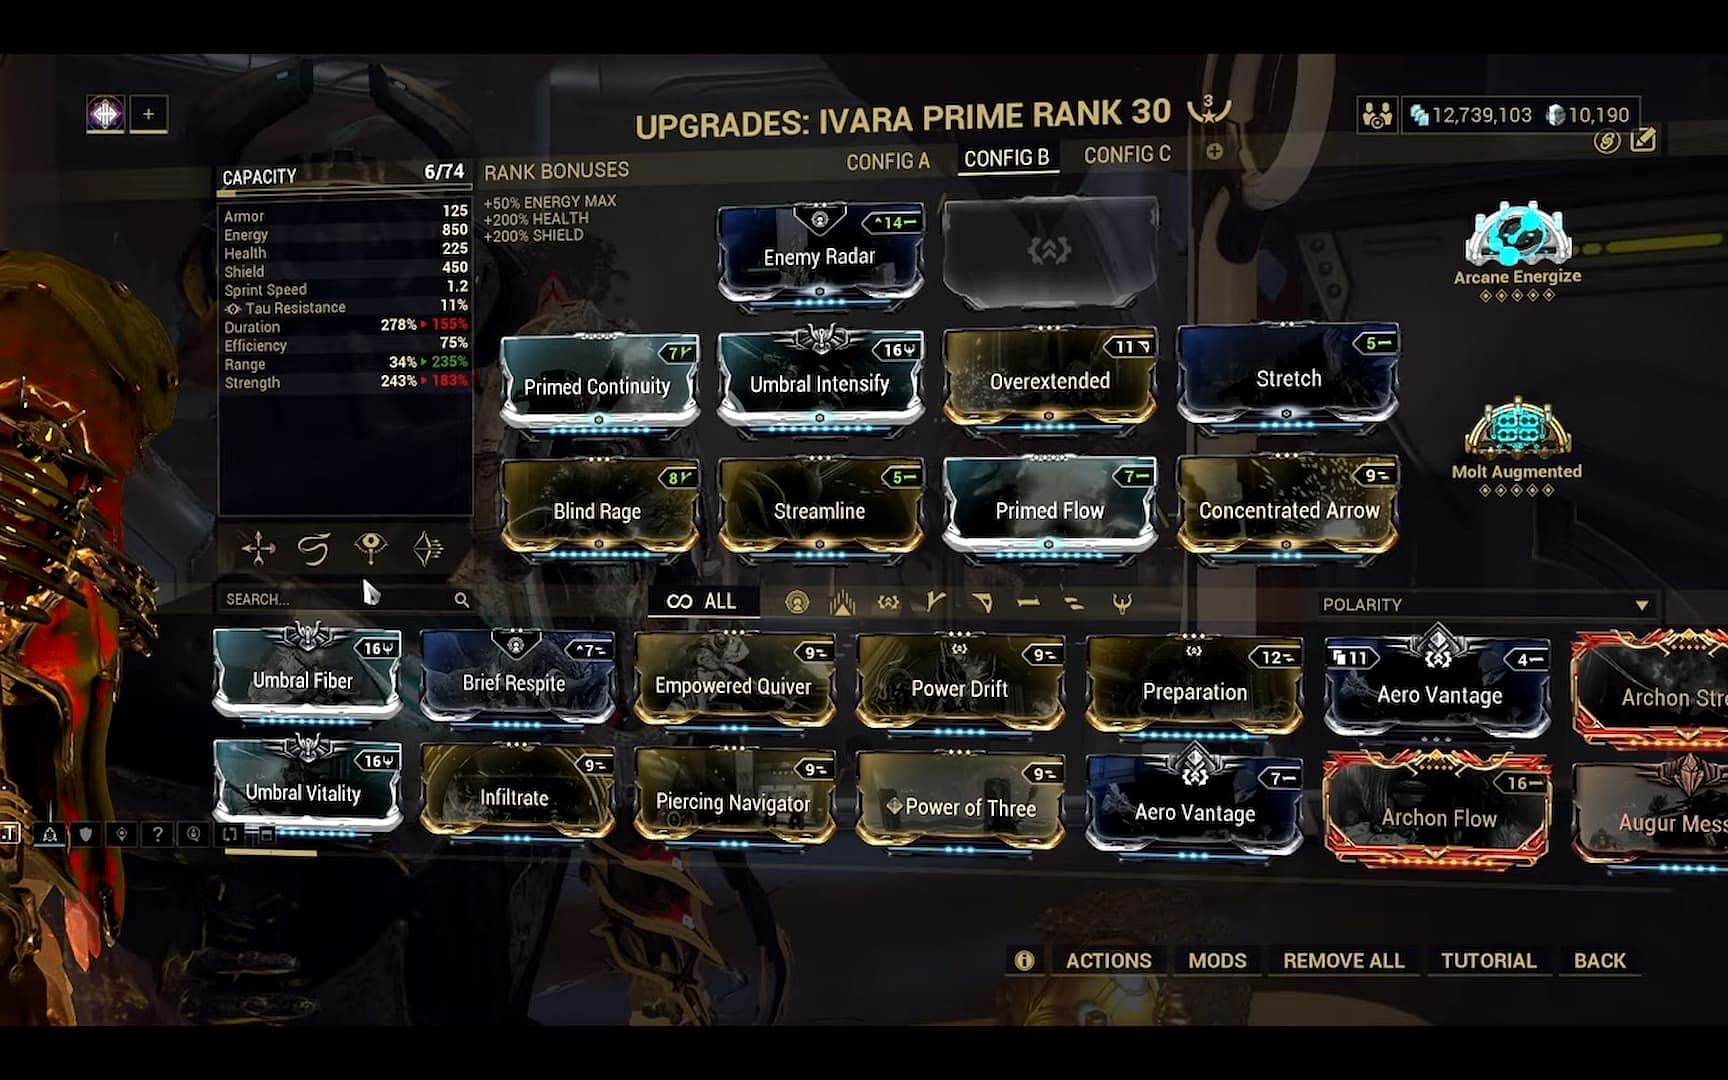 An Ivara Prime build for Navigator Augment mod can be suitable for Eidolon hunting (Image via Digital Extremes)